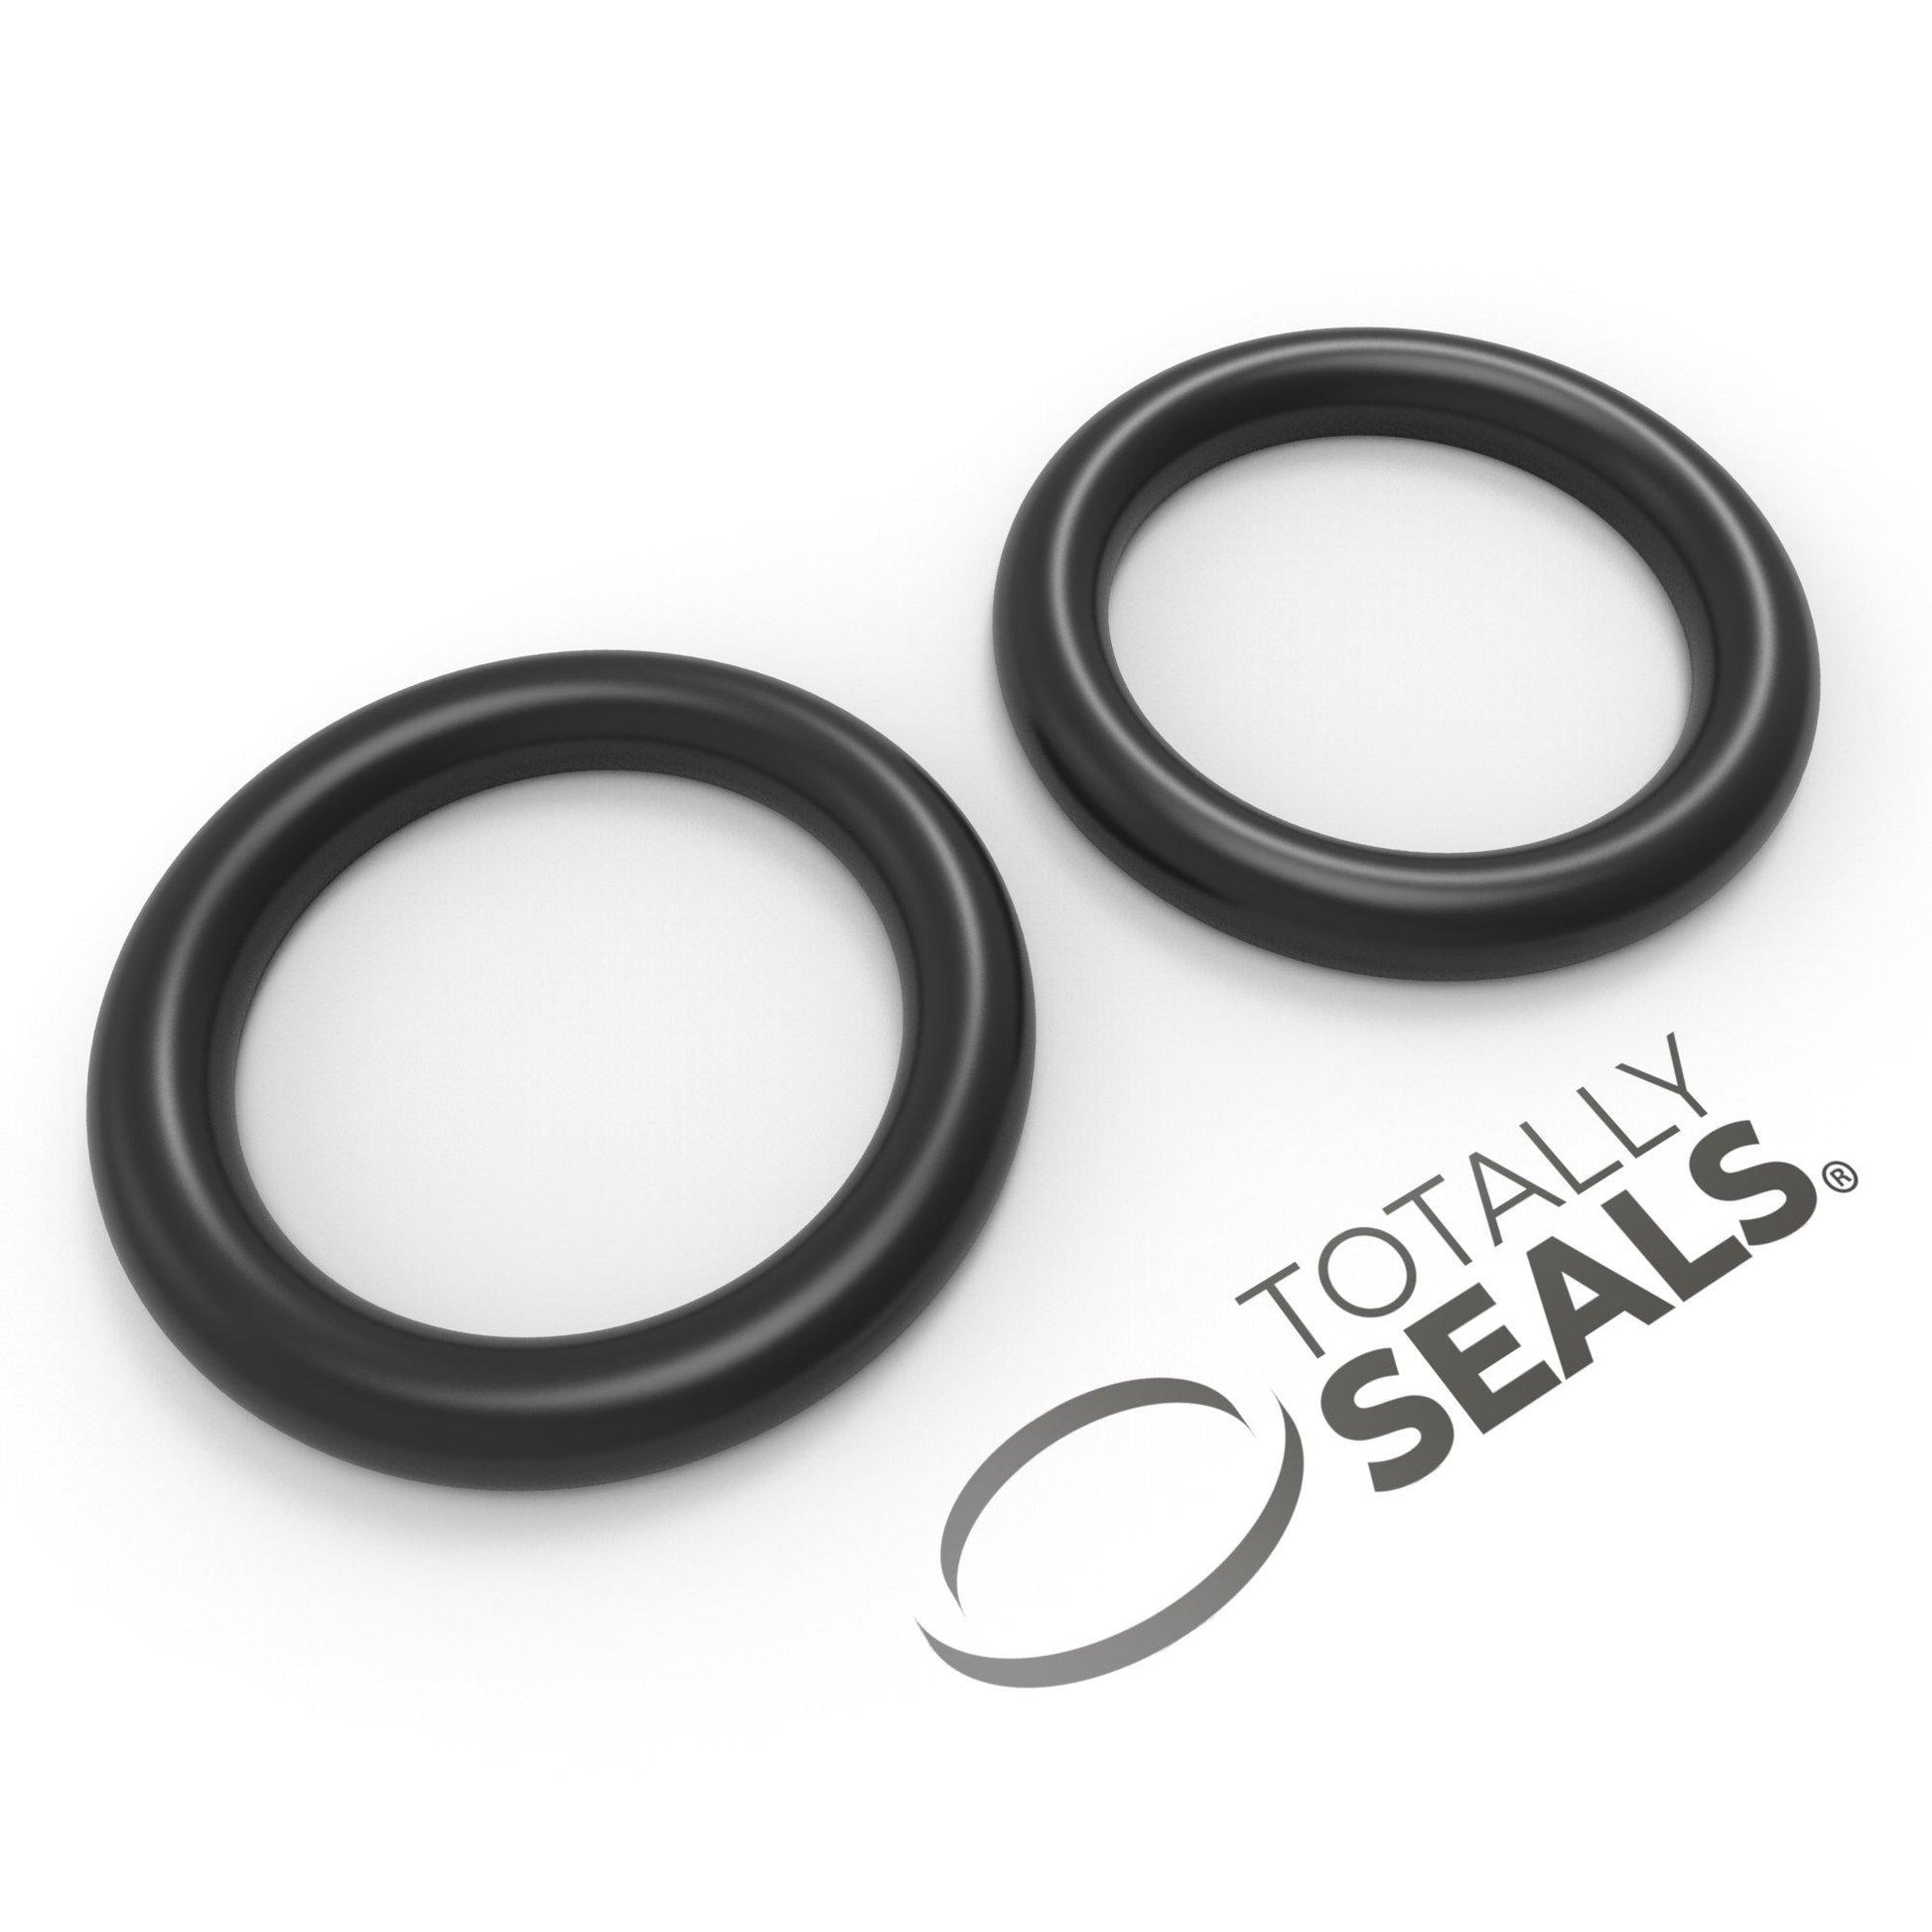 20mm x 1.5mm (23mm OD) Nitrile O-Rings - Totally Seals®